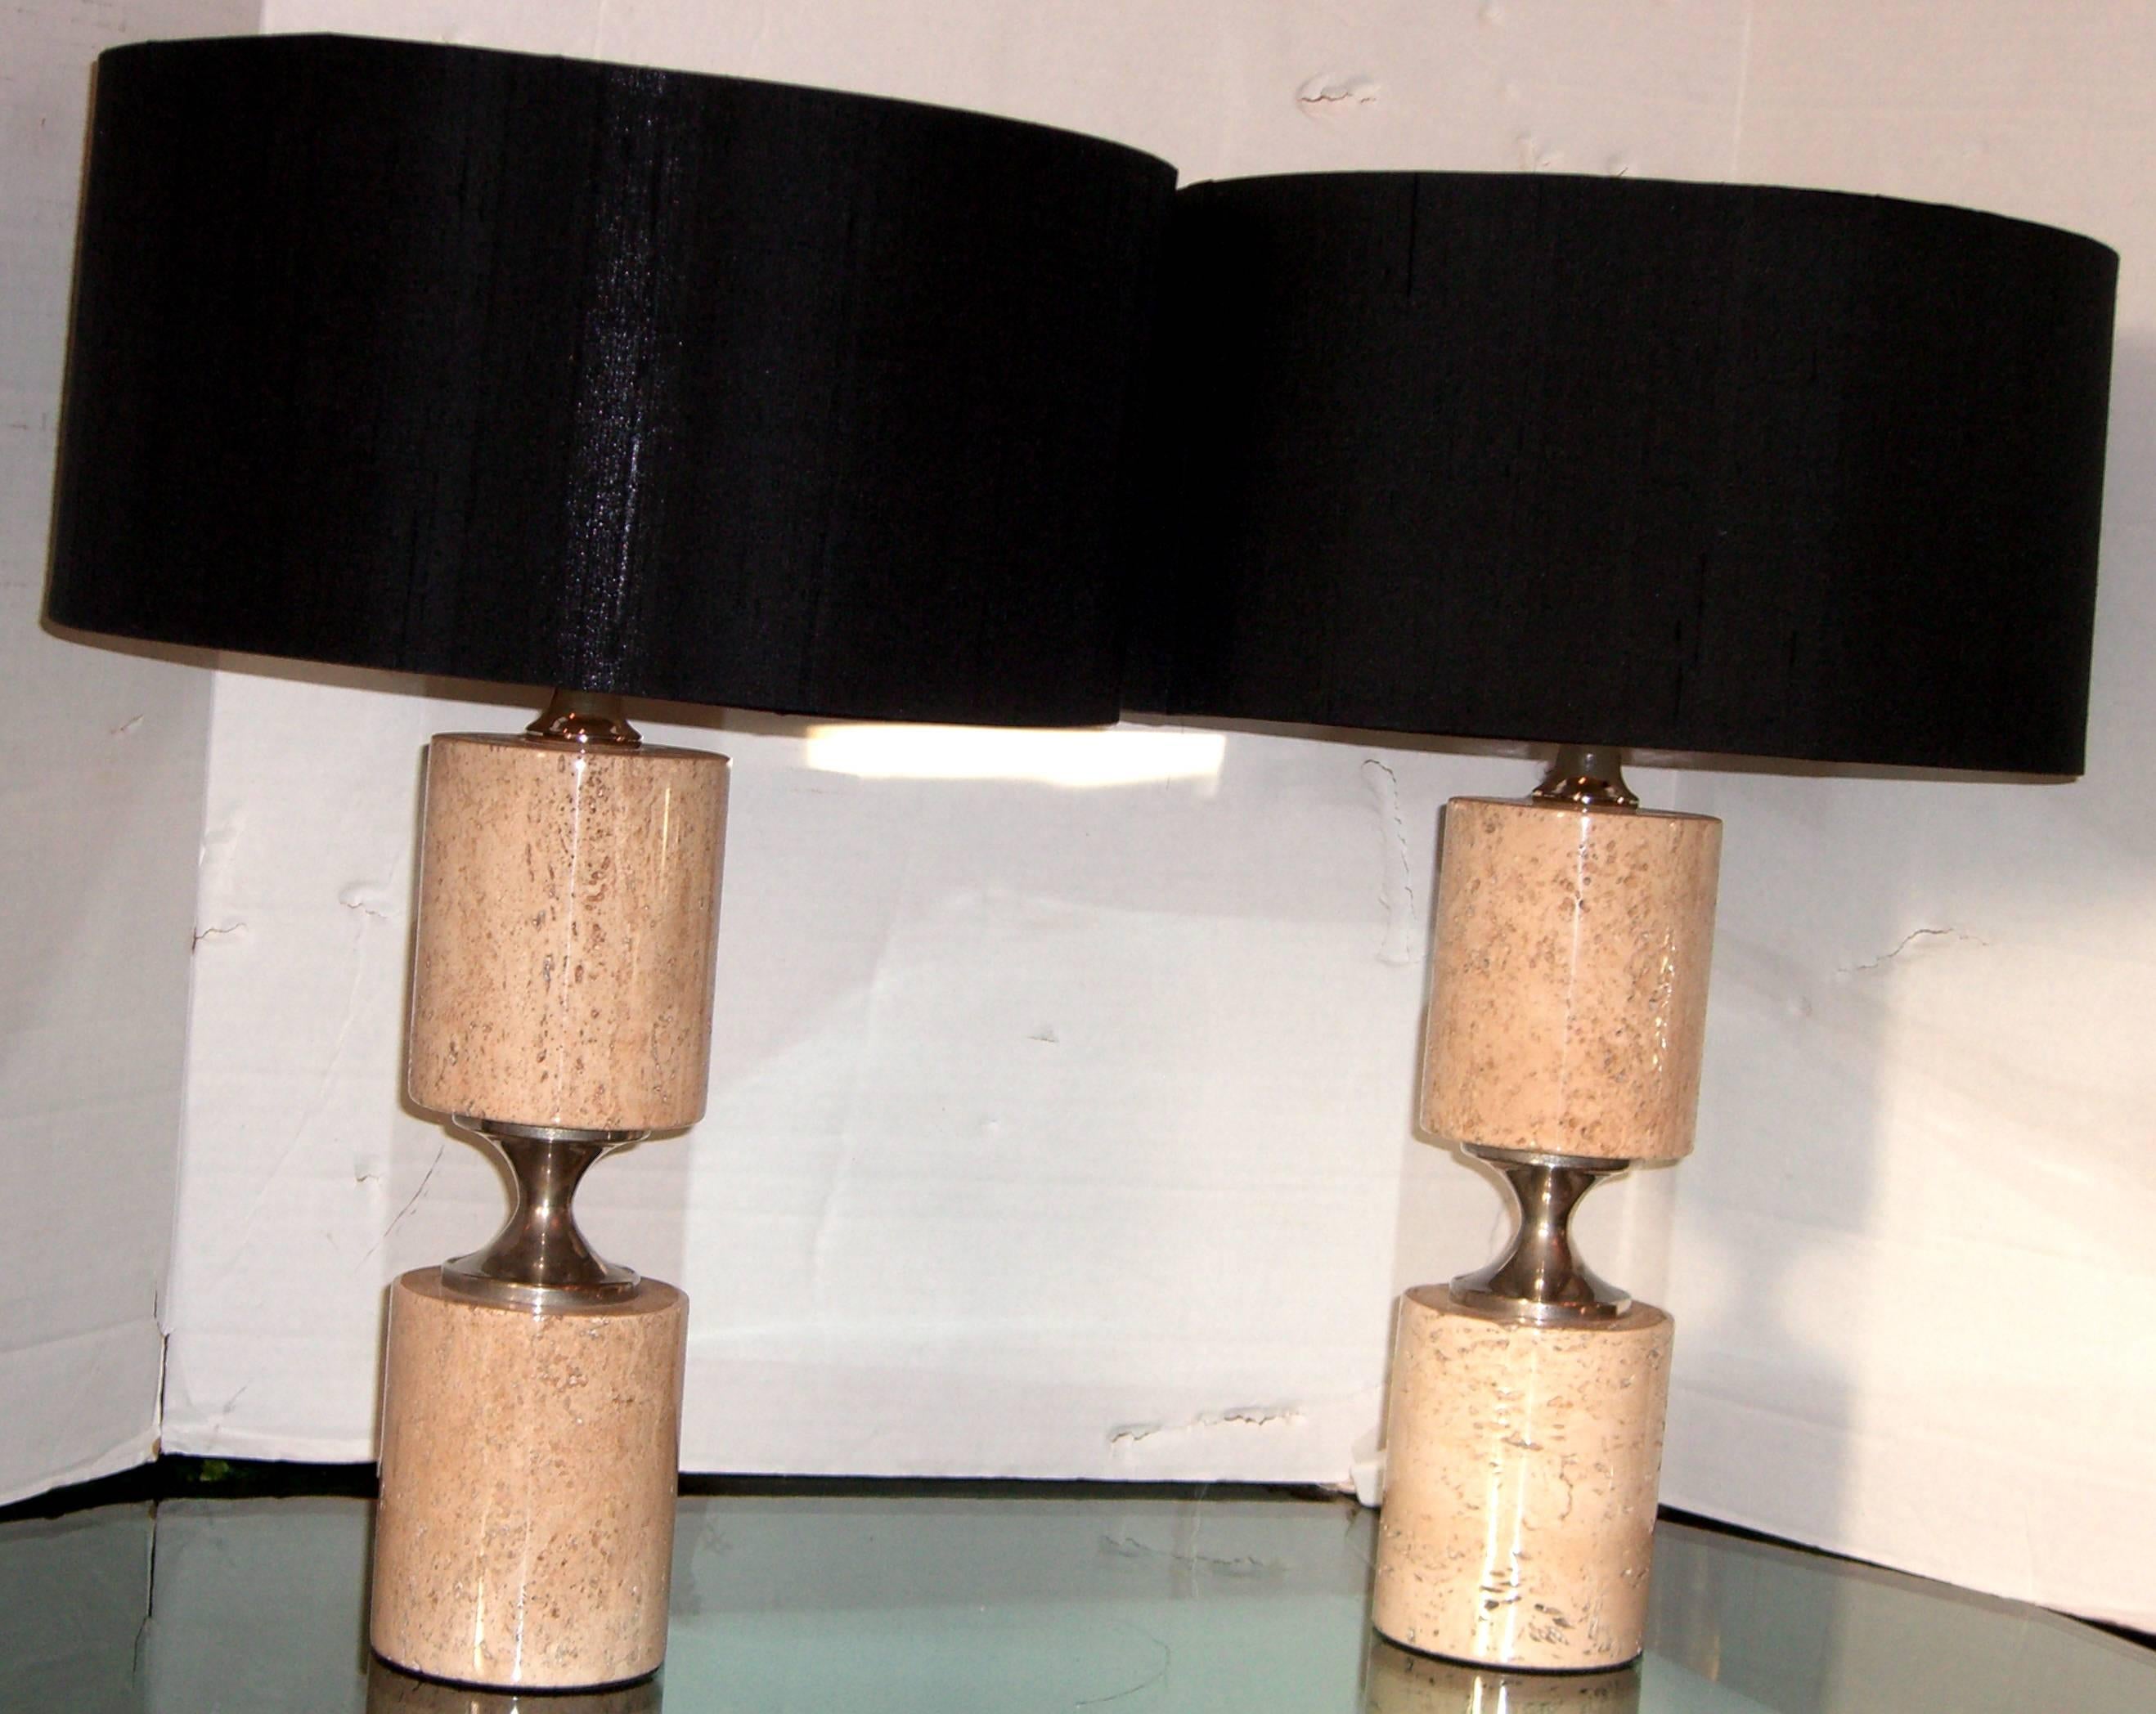 A pair of cylindrical form taupe tone natural stone table lamps. The center is a hourglass shaped nickel. New silk shades in black have been added. All wiring is new for the US.